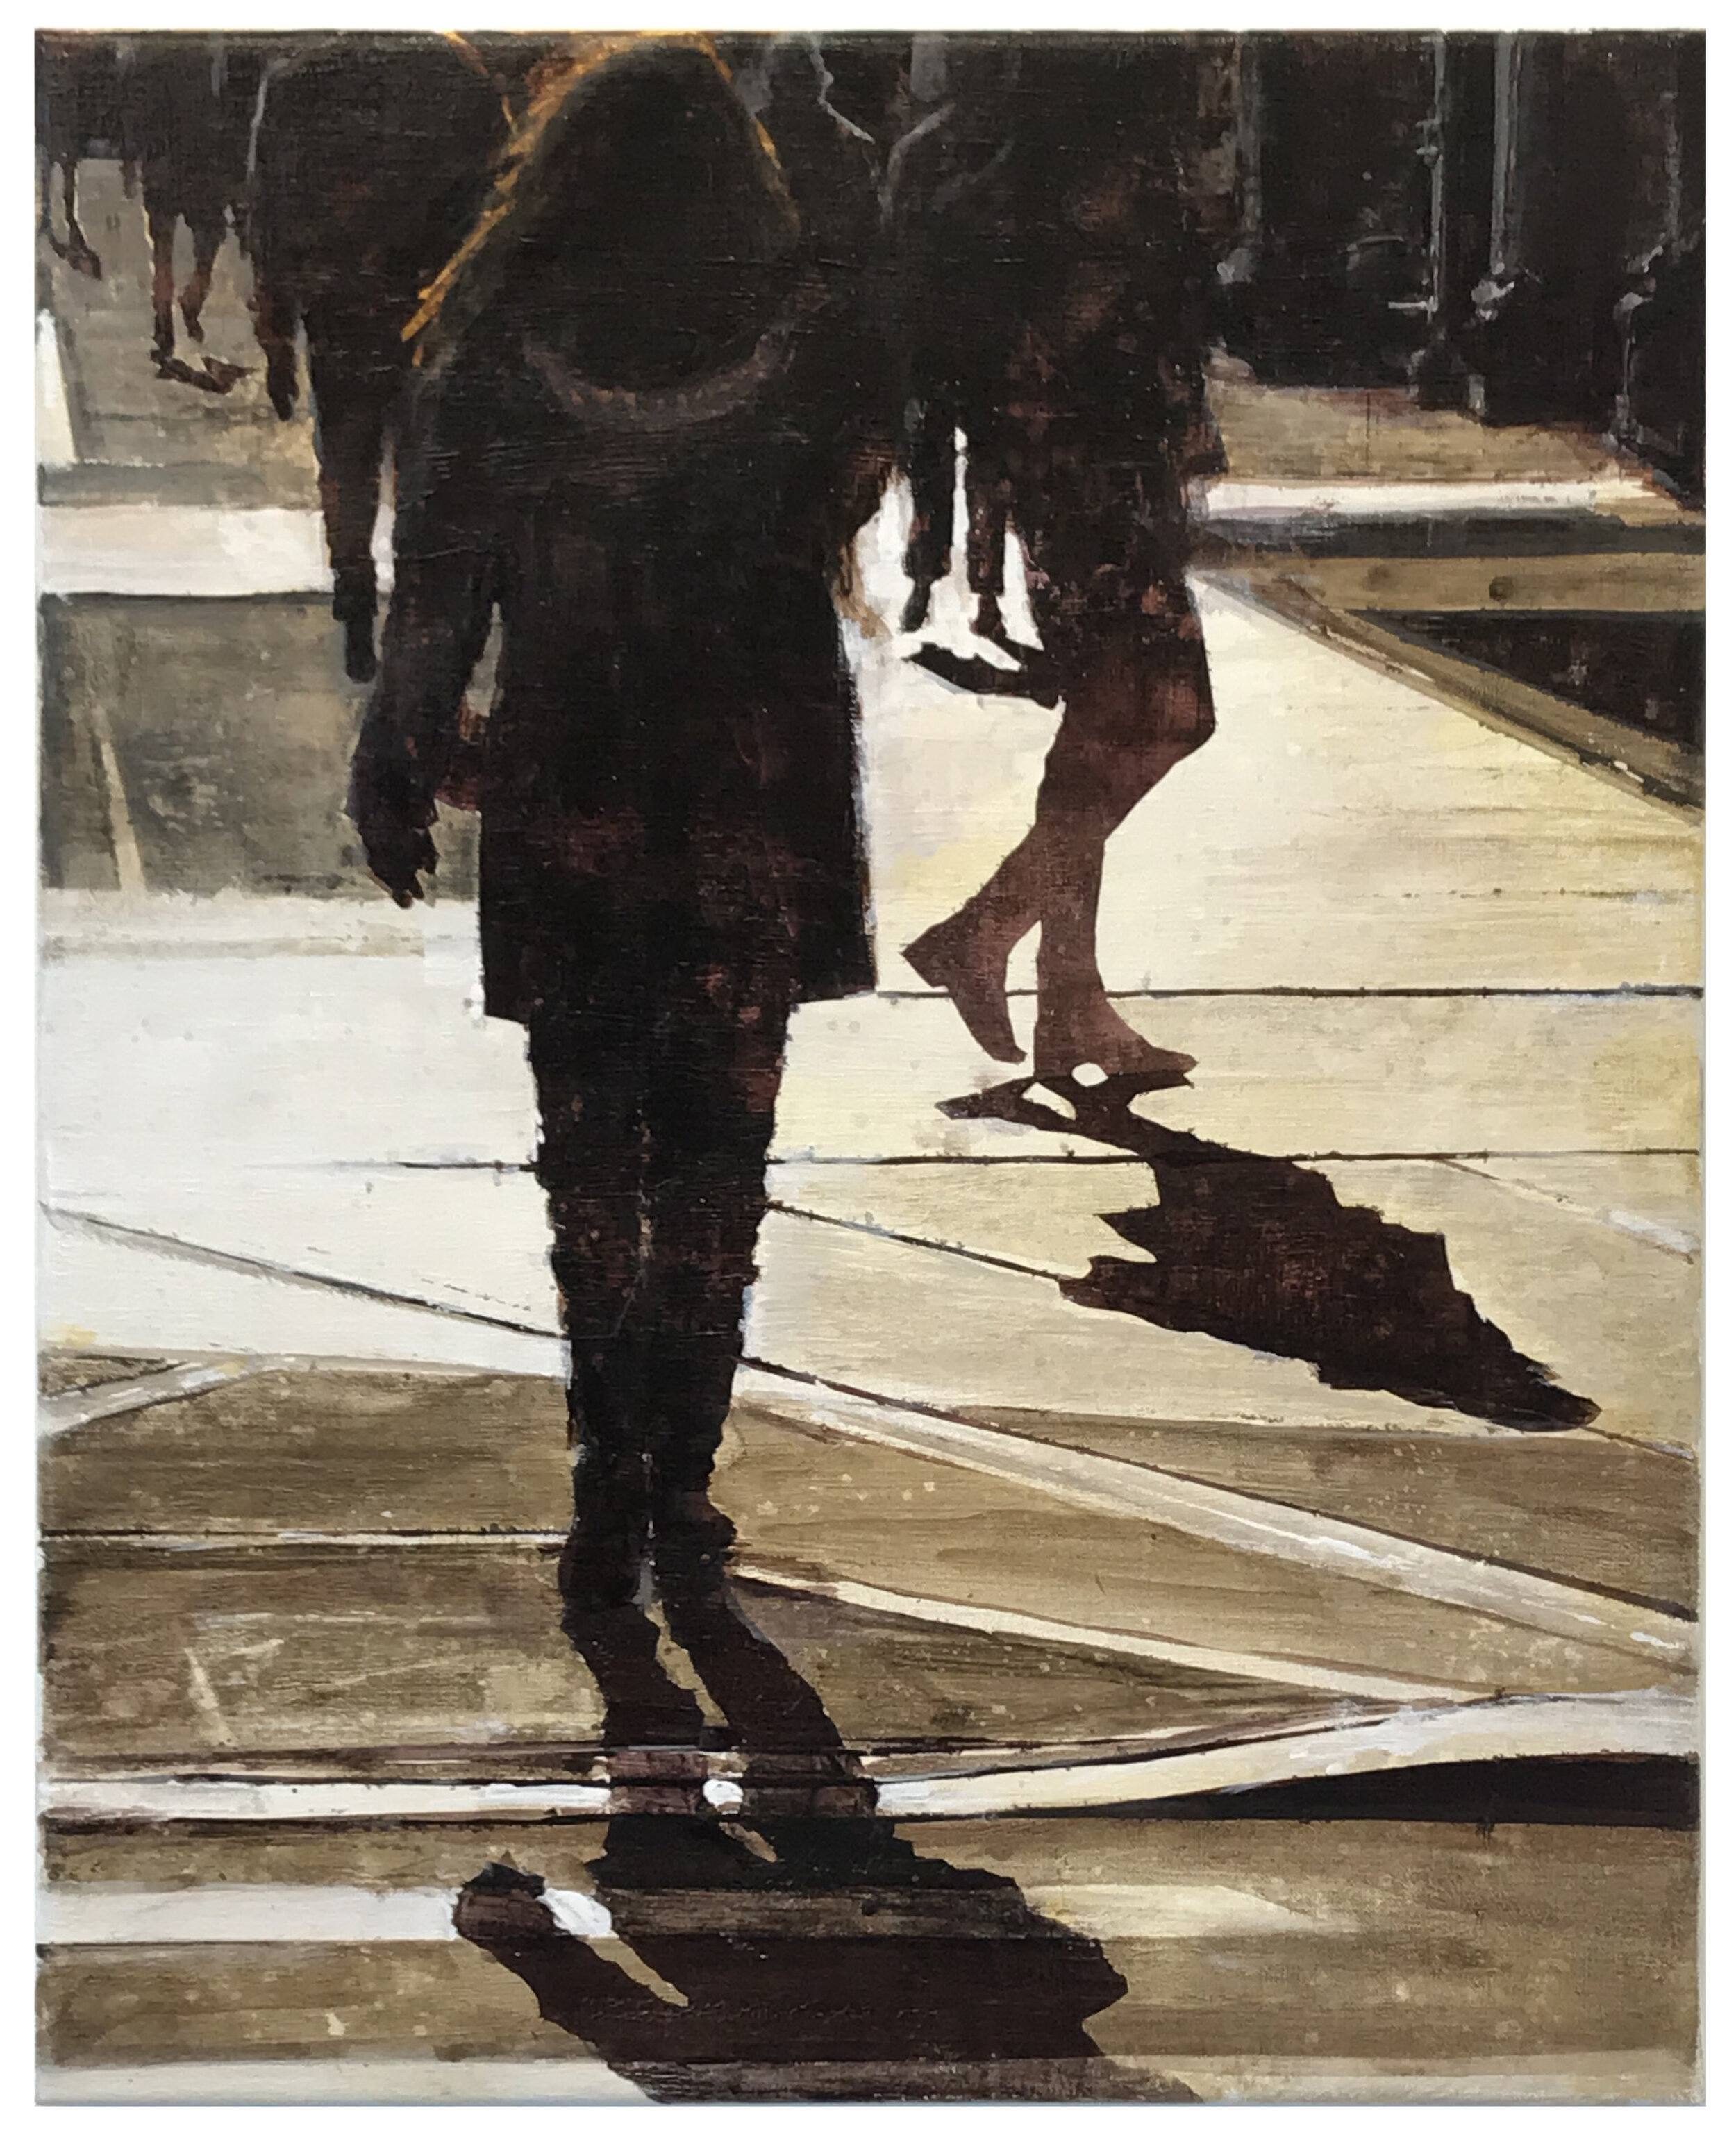  New York Before 3 (study) 24 x 19 inches (60 x 48 cm) Acrylic on linen 2020 